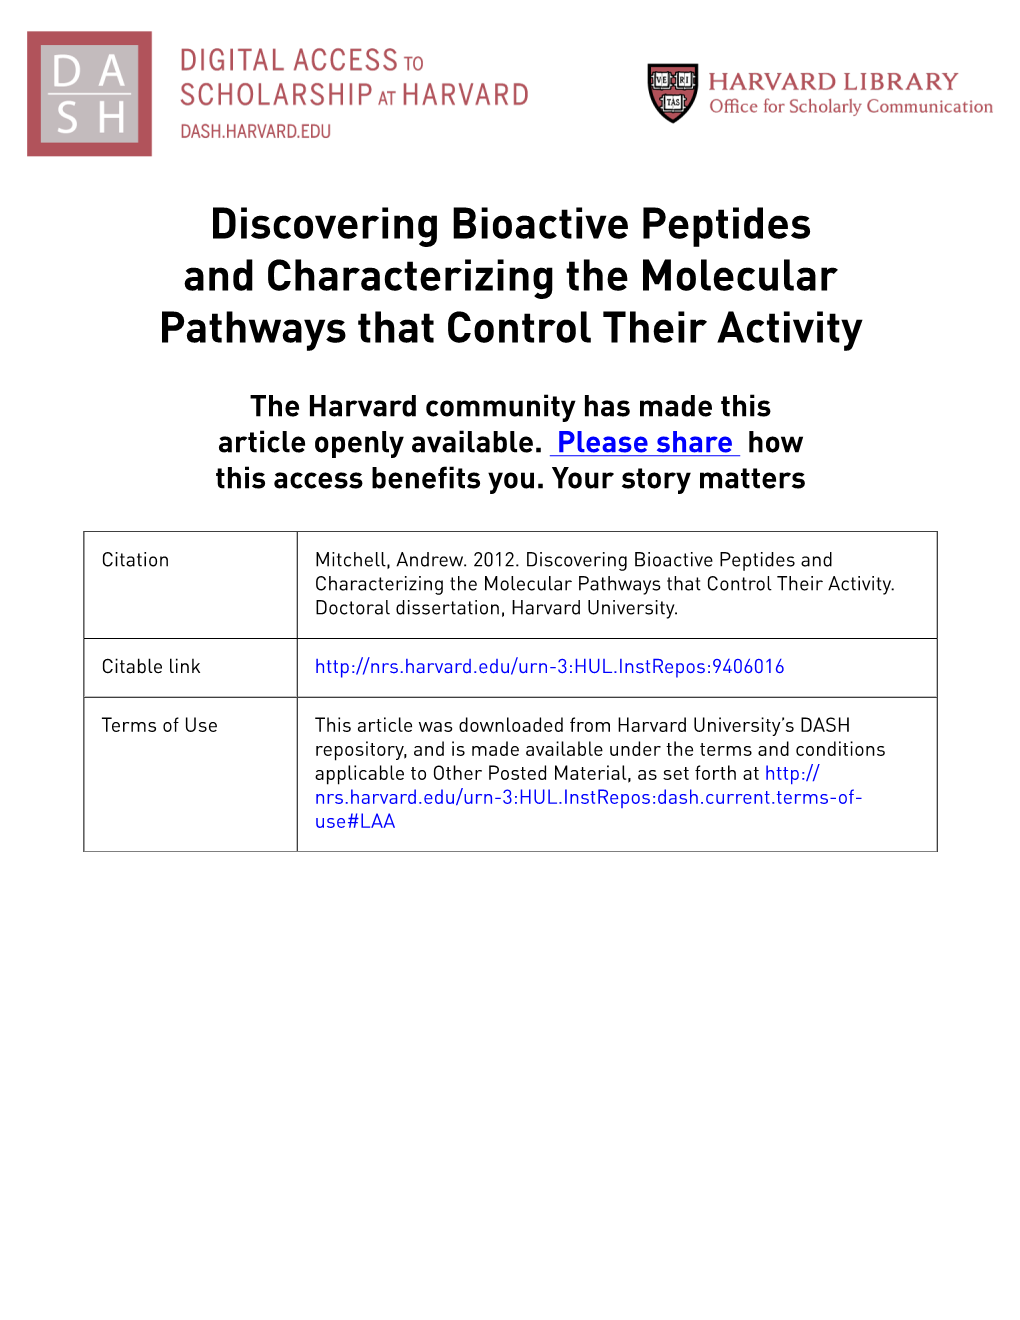 Discovering Bioactive Peptides and Characterizing the Molecular Pathways That Control Their Activity